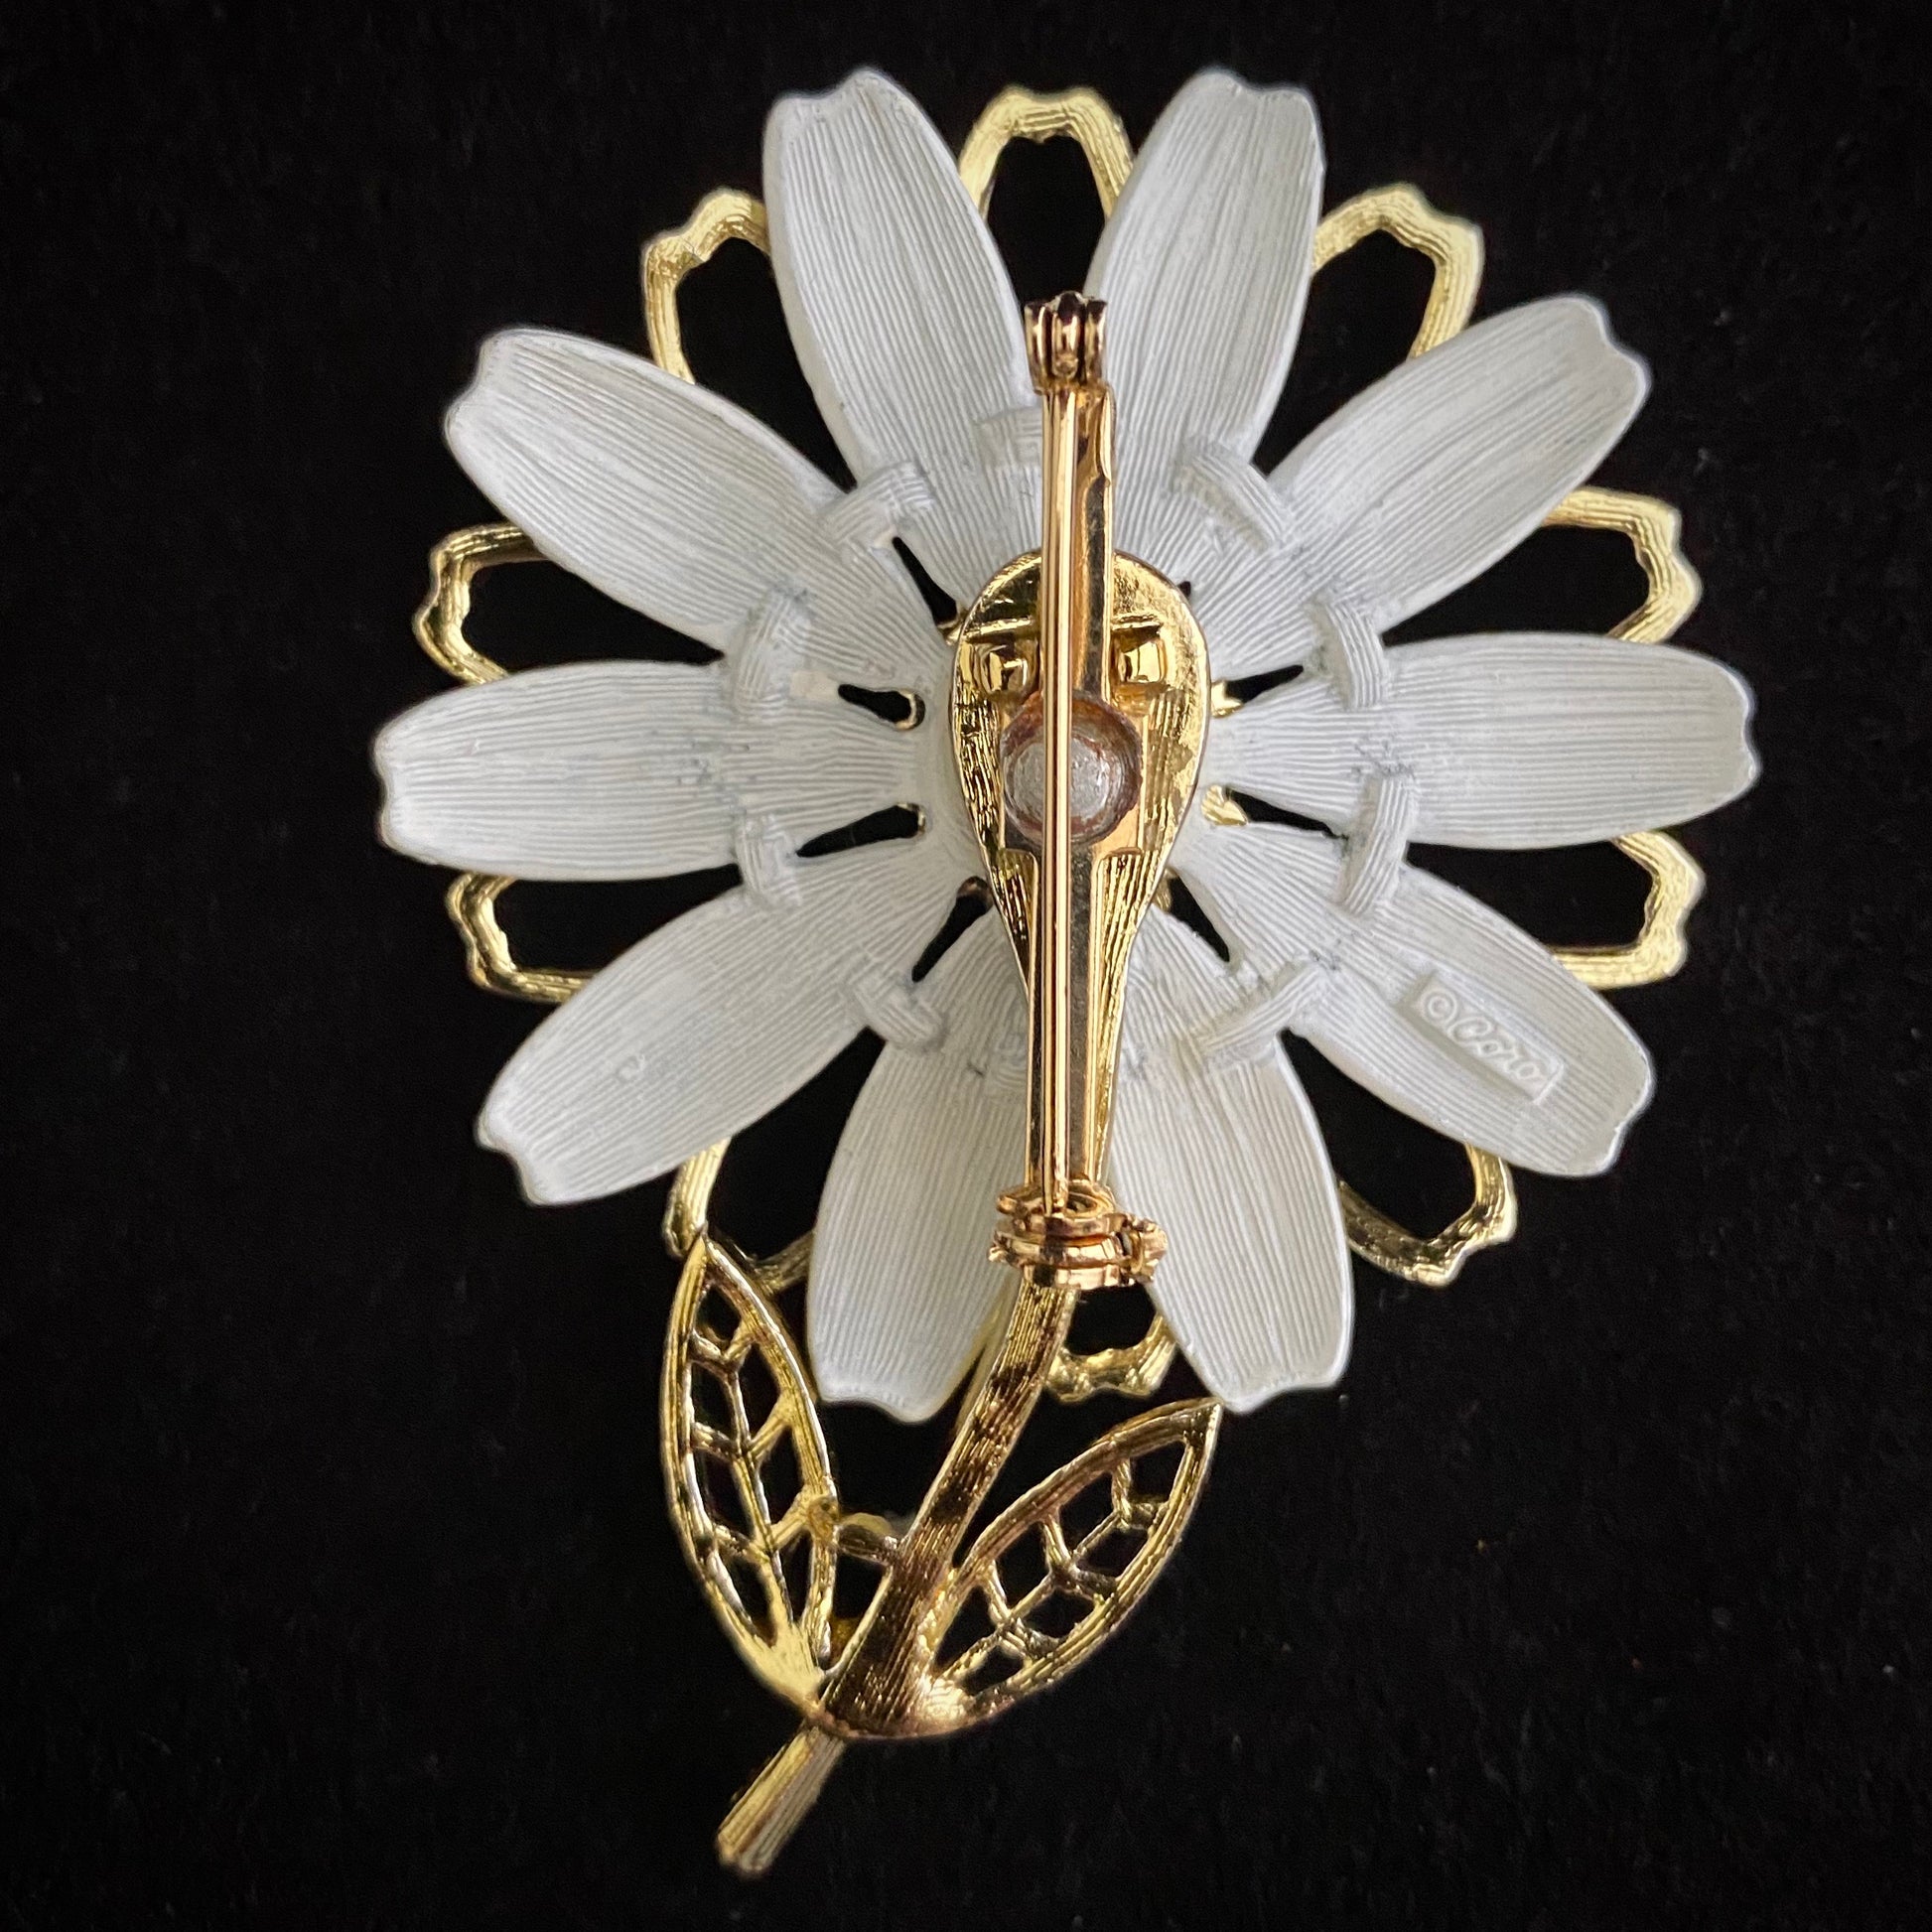 Late 60s / Early 70s Coro Flower Brooch - Retro Kandy Vintage